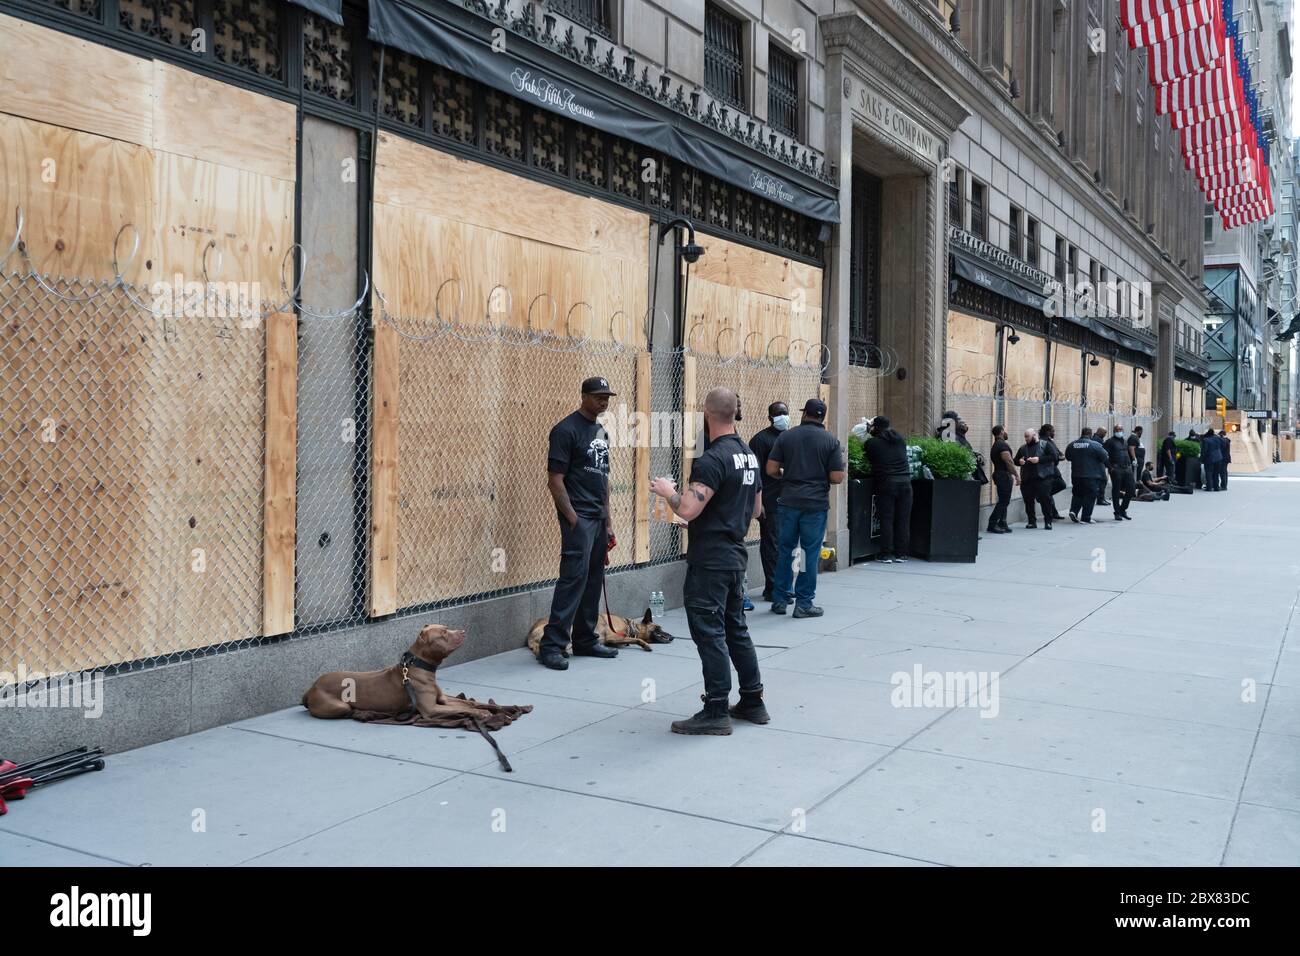 NEW YORK, NY - JUNE 03: Famed Saks Fifth Avenue prepare for more looting with with chain link fence over the boarded windows and security guards and d Stock Photo